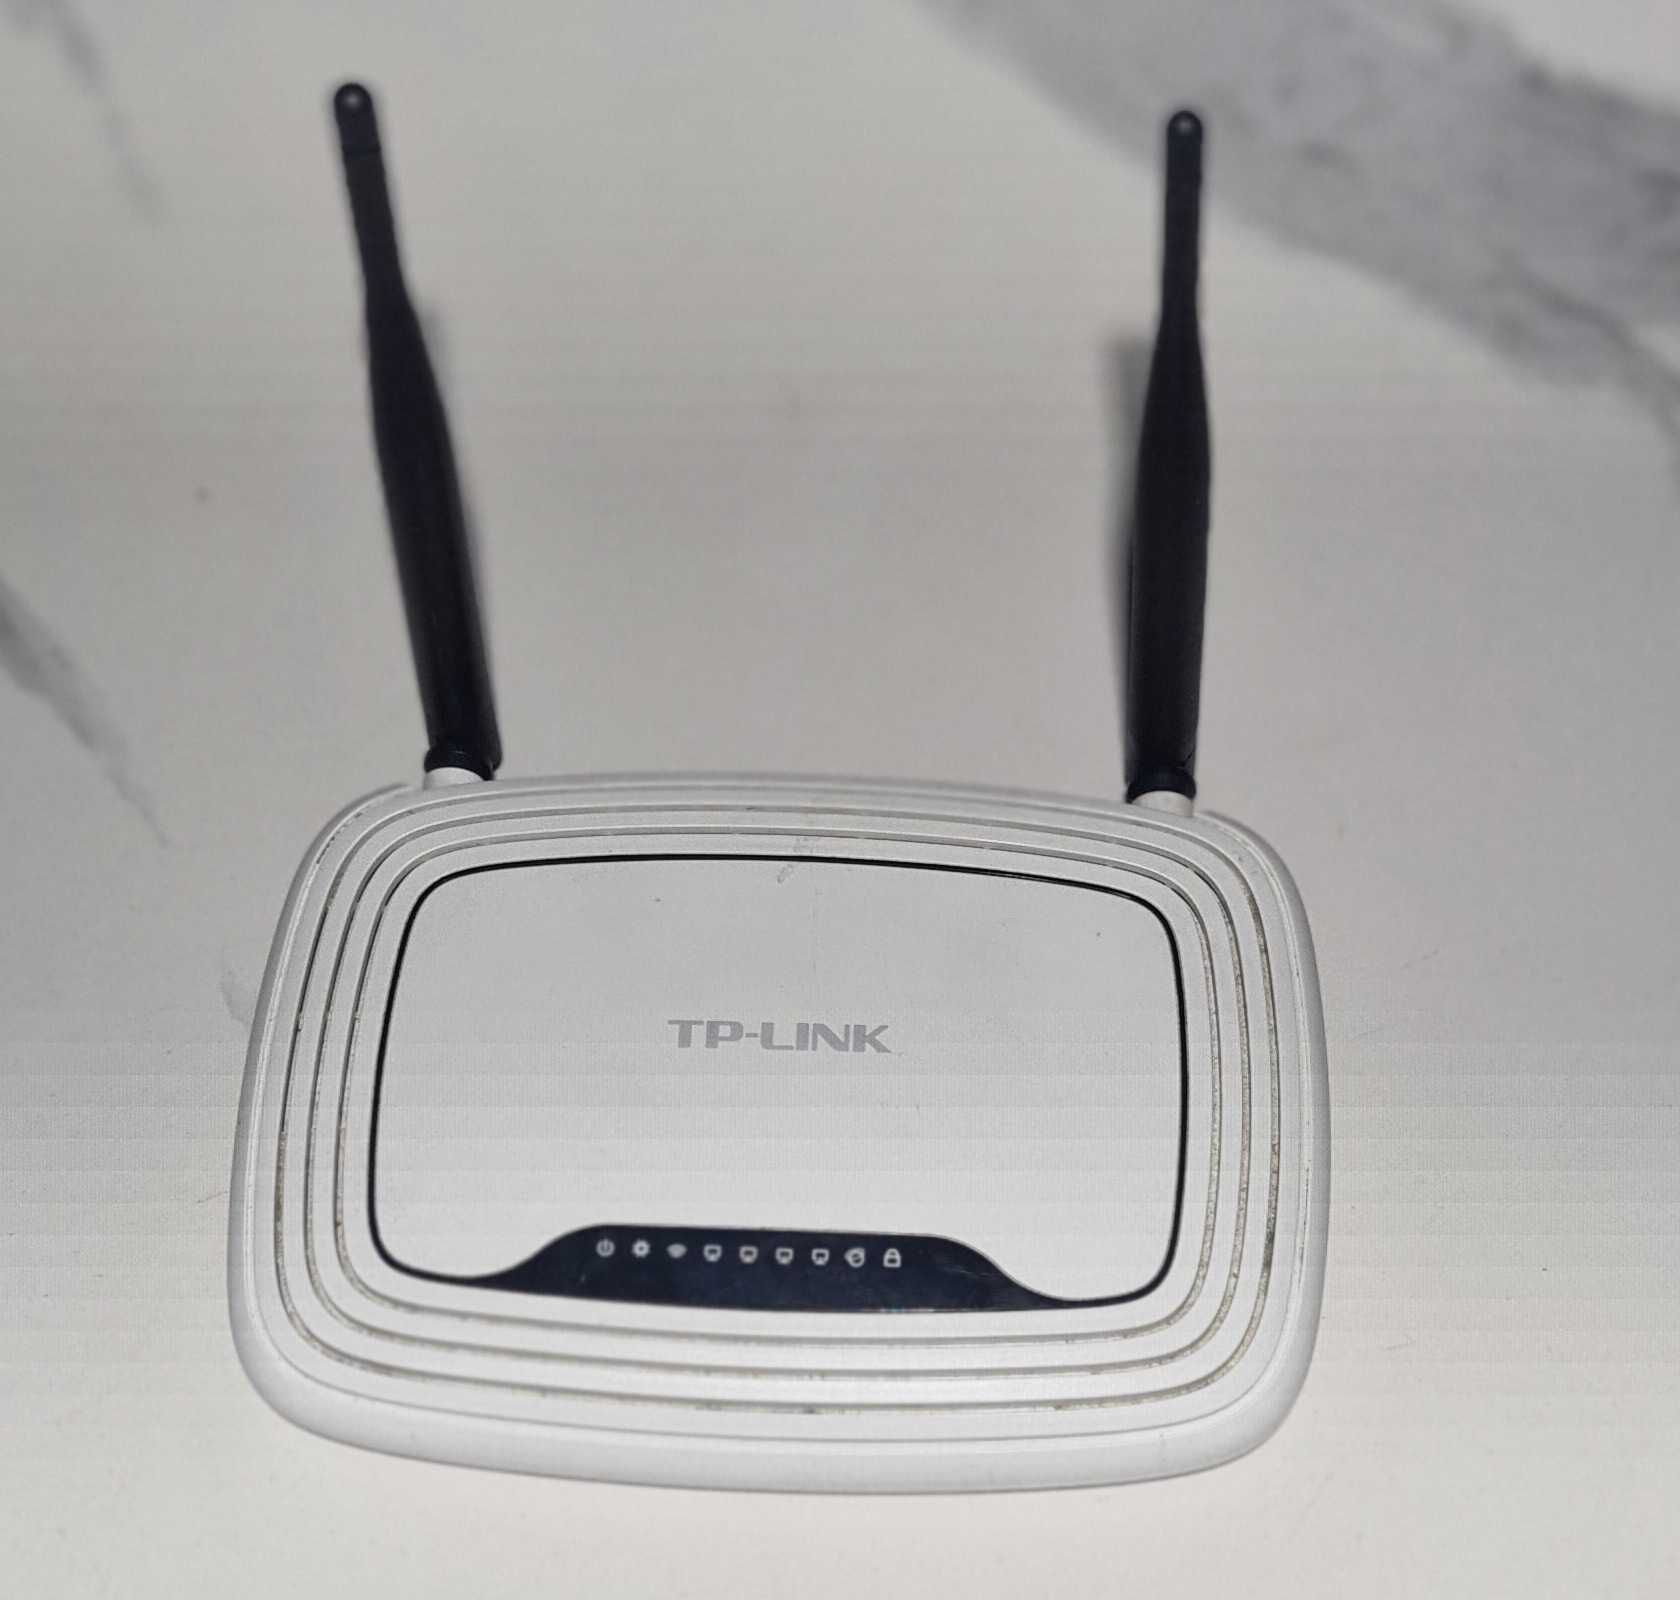 Router TP-Link 300Mbps +2 uszkodzone